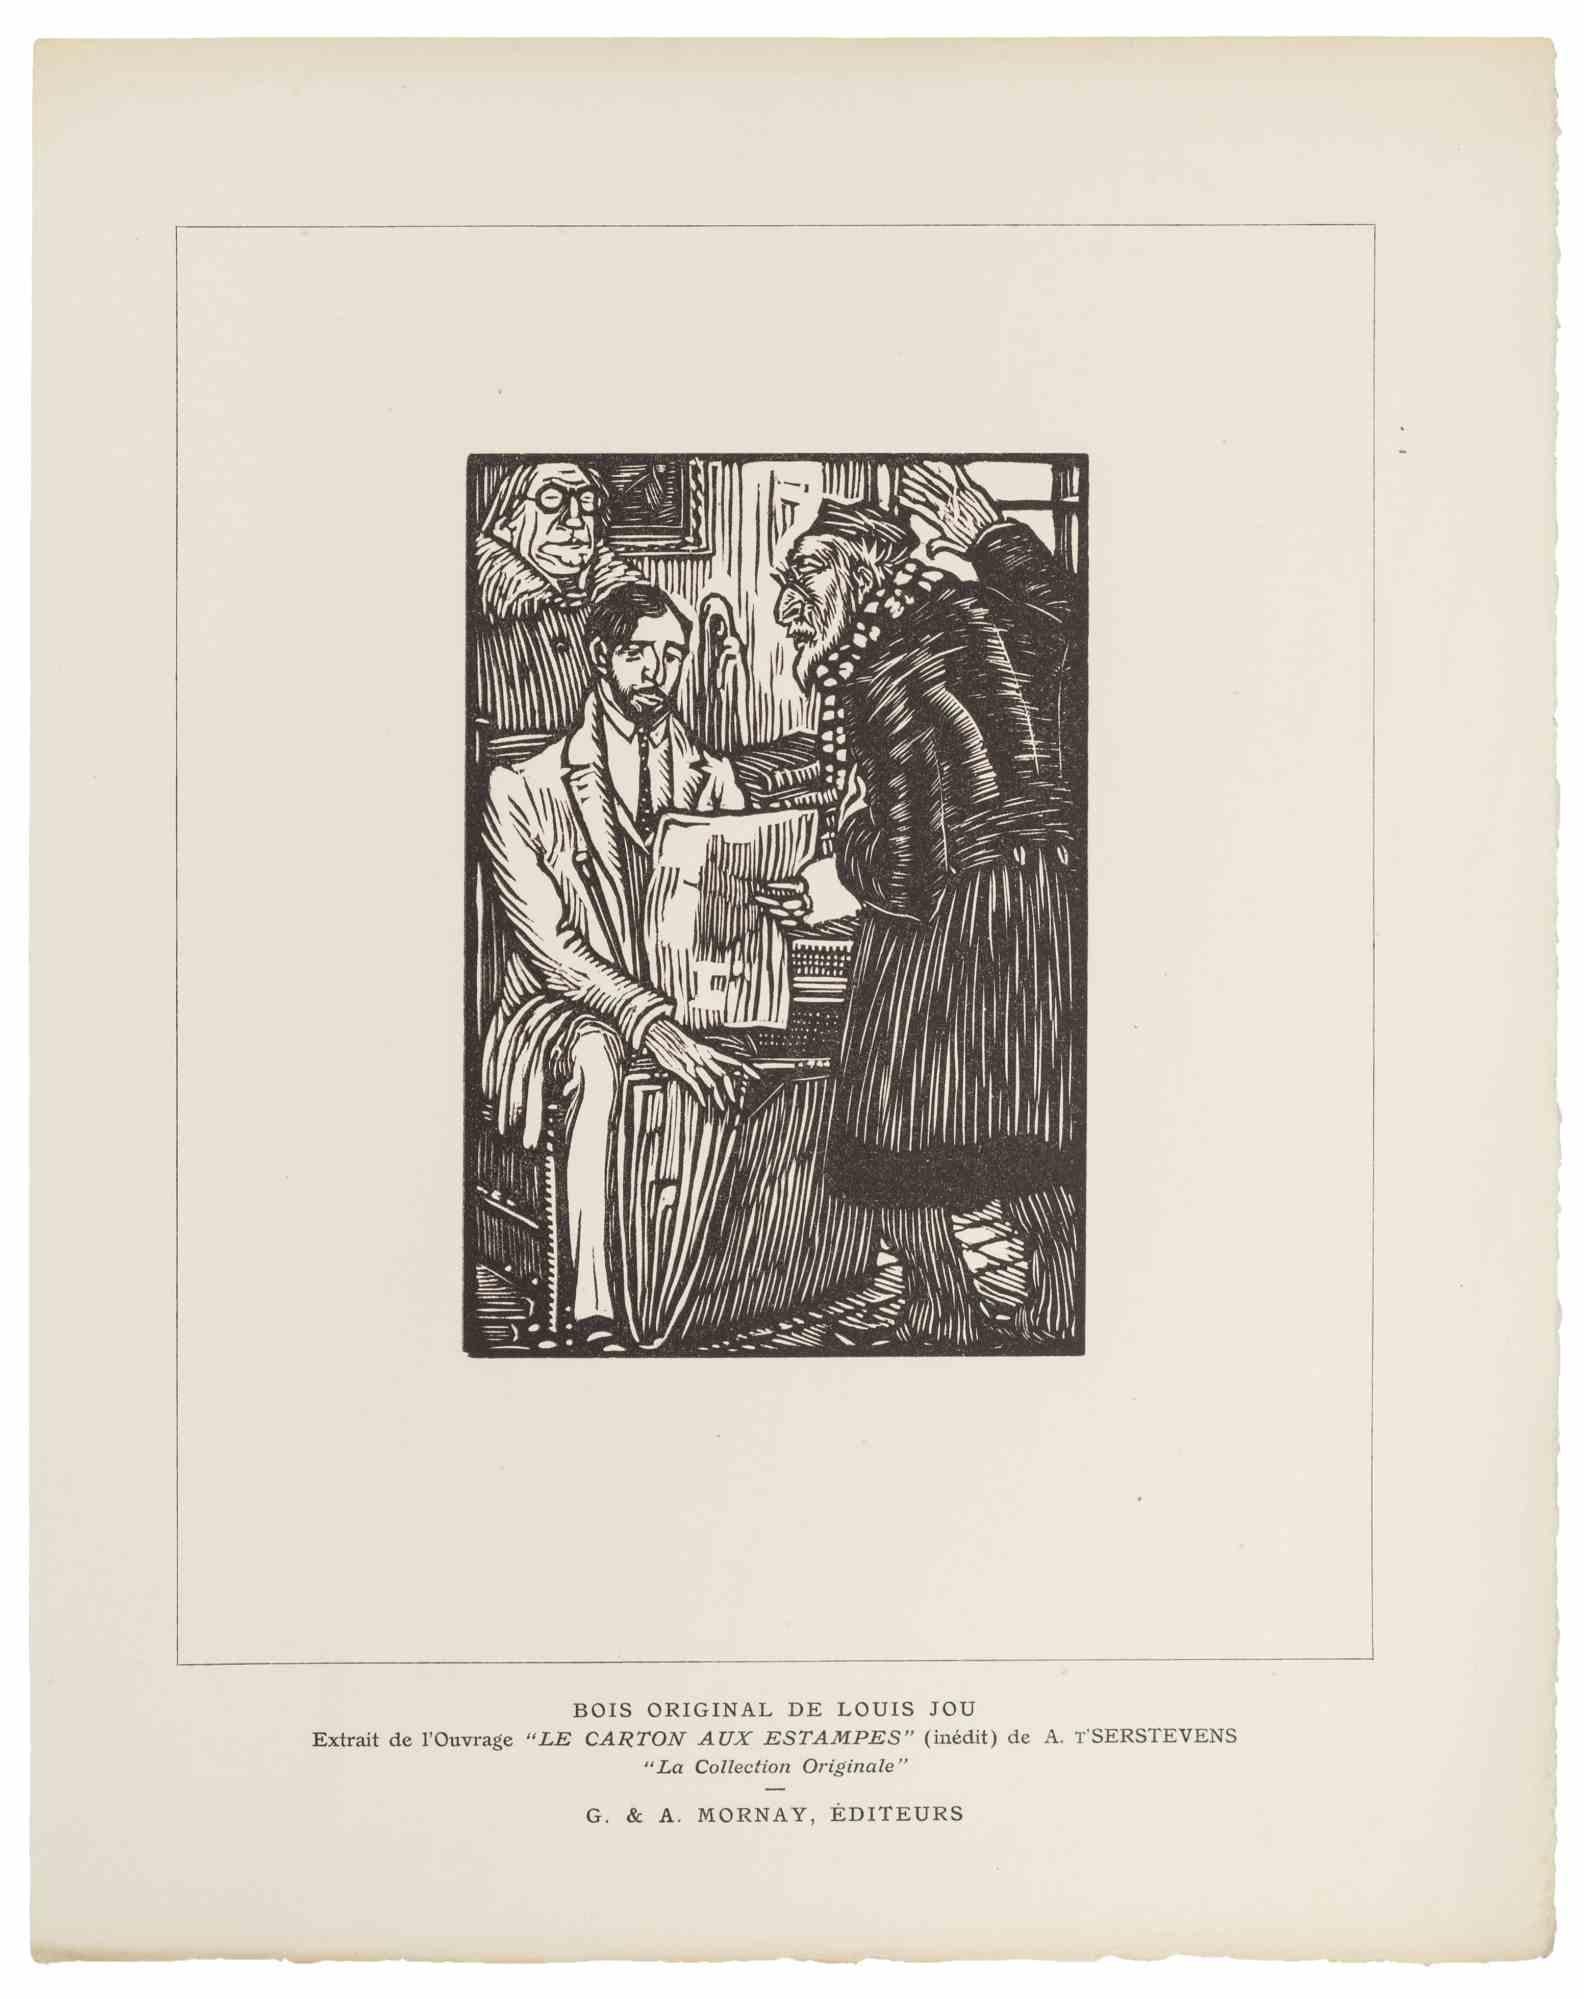 Old Man Giving News is a woodcut print realized by Louis Jou in the Early 20th Century.

Editor G. & A. Mornay.

Good conditions.

Louis Jou (Gracia, 1882 - Baux, 1968), the twentieth-century etcher and wood engraver, was a prolific illustrator of a